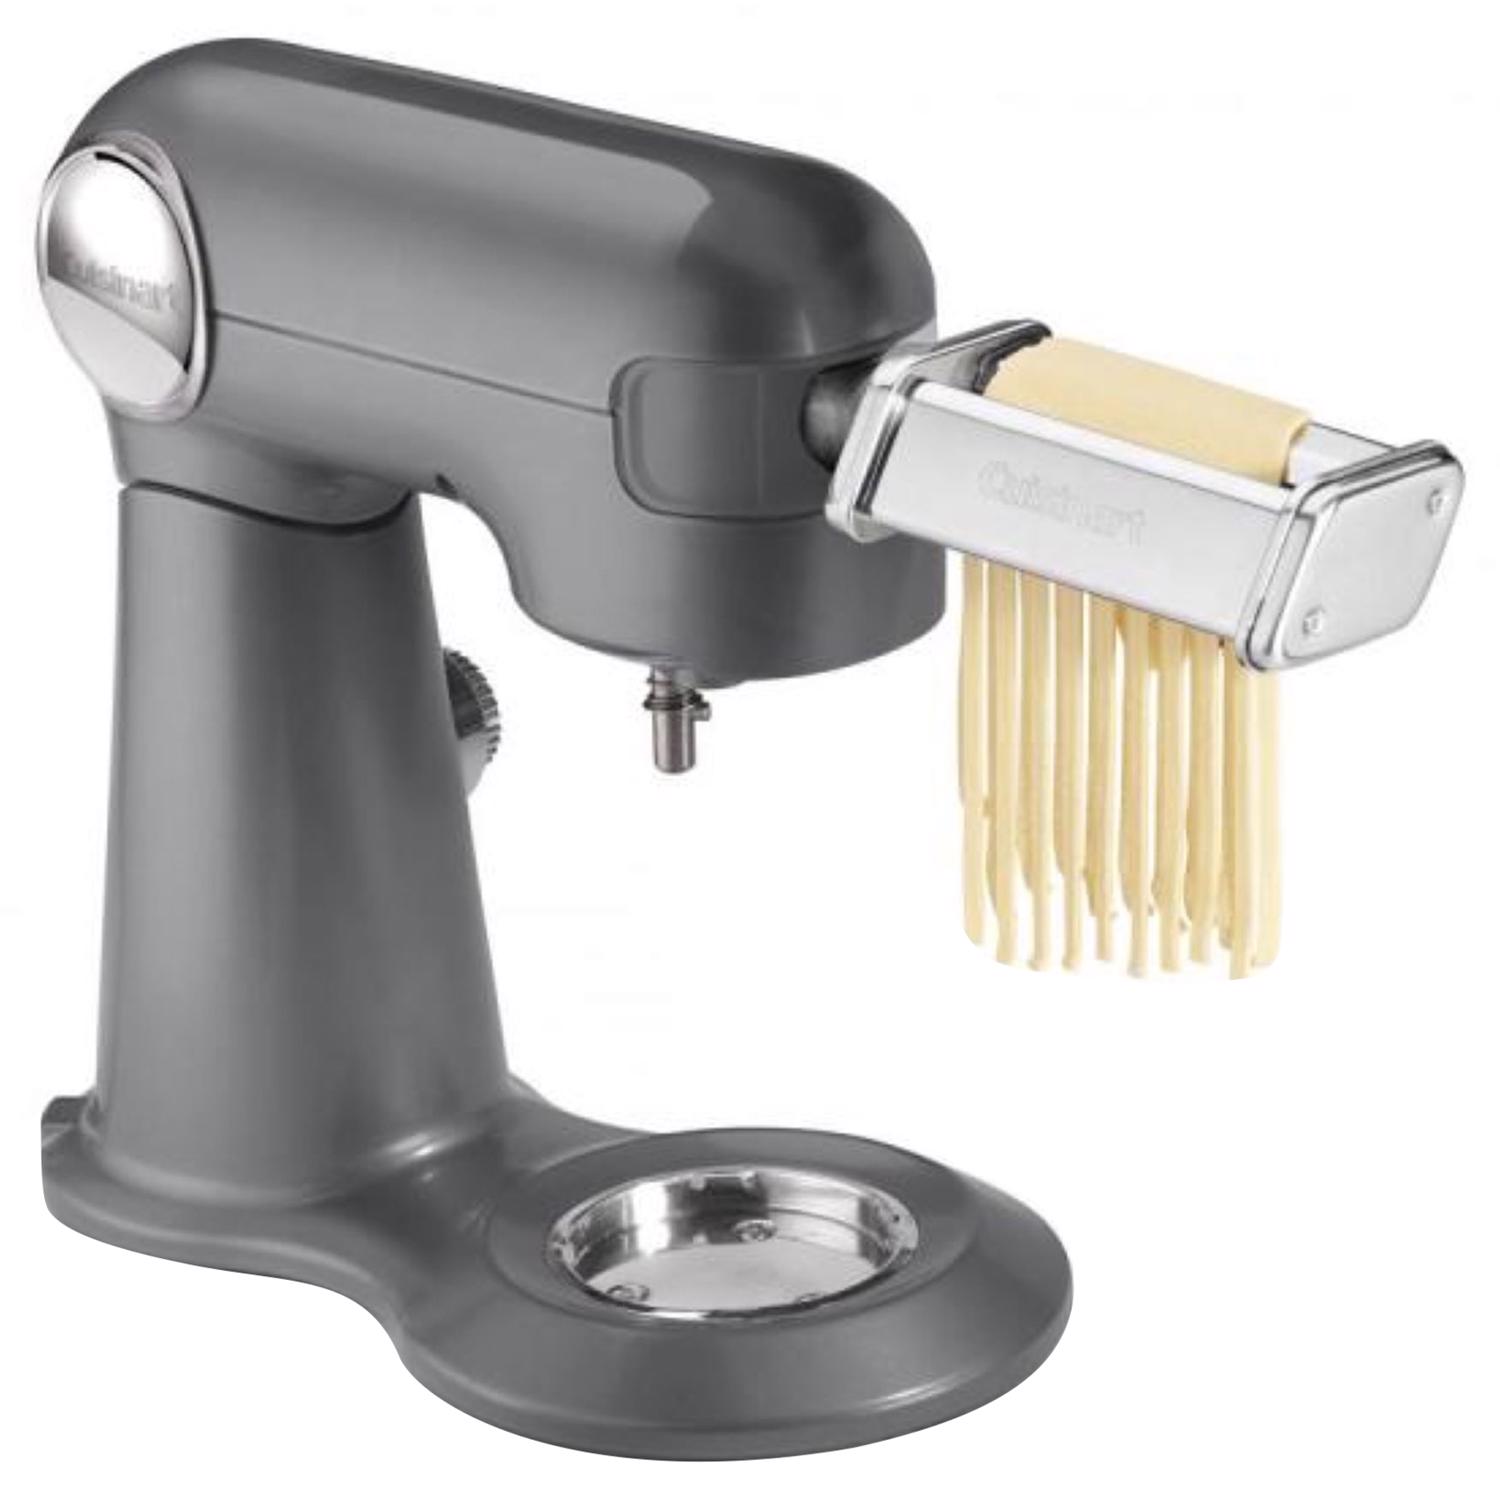 Photos - Other interior and decor Cuisinart 5.5 qt Stainless Steel Pasta Roller and Cutter PRS-50 